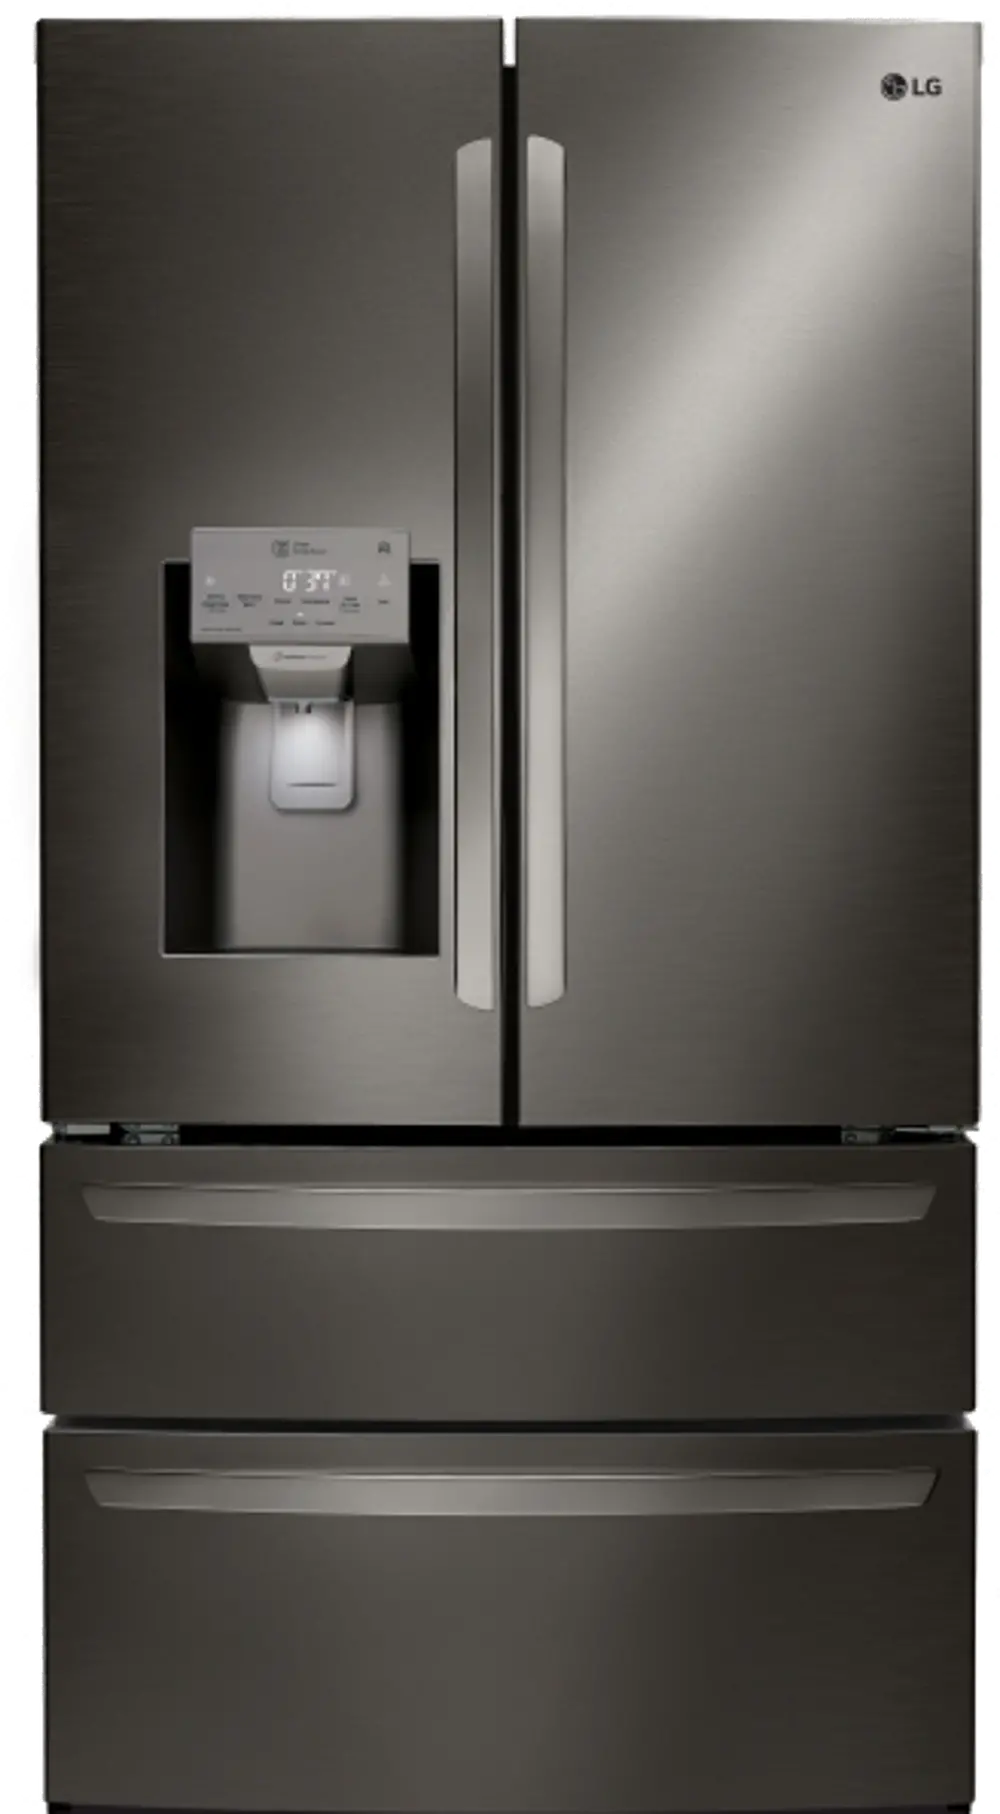 LMXS28626D LG 27.8 cu ft French Door Refrigerator - Black Stainless Steel-1